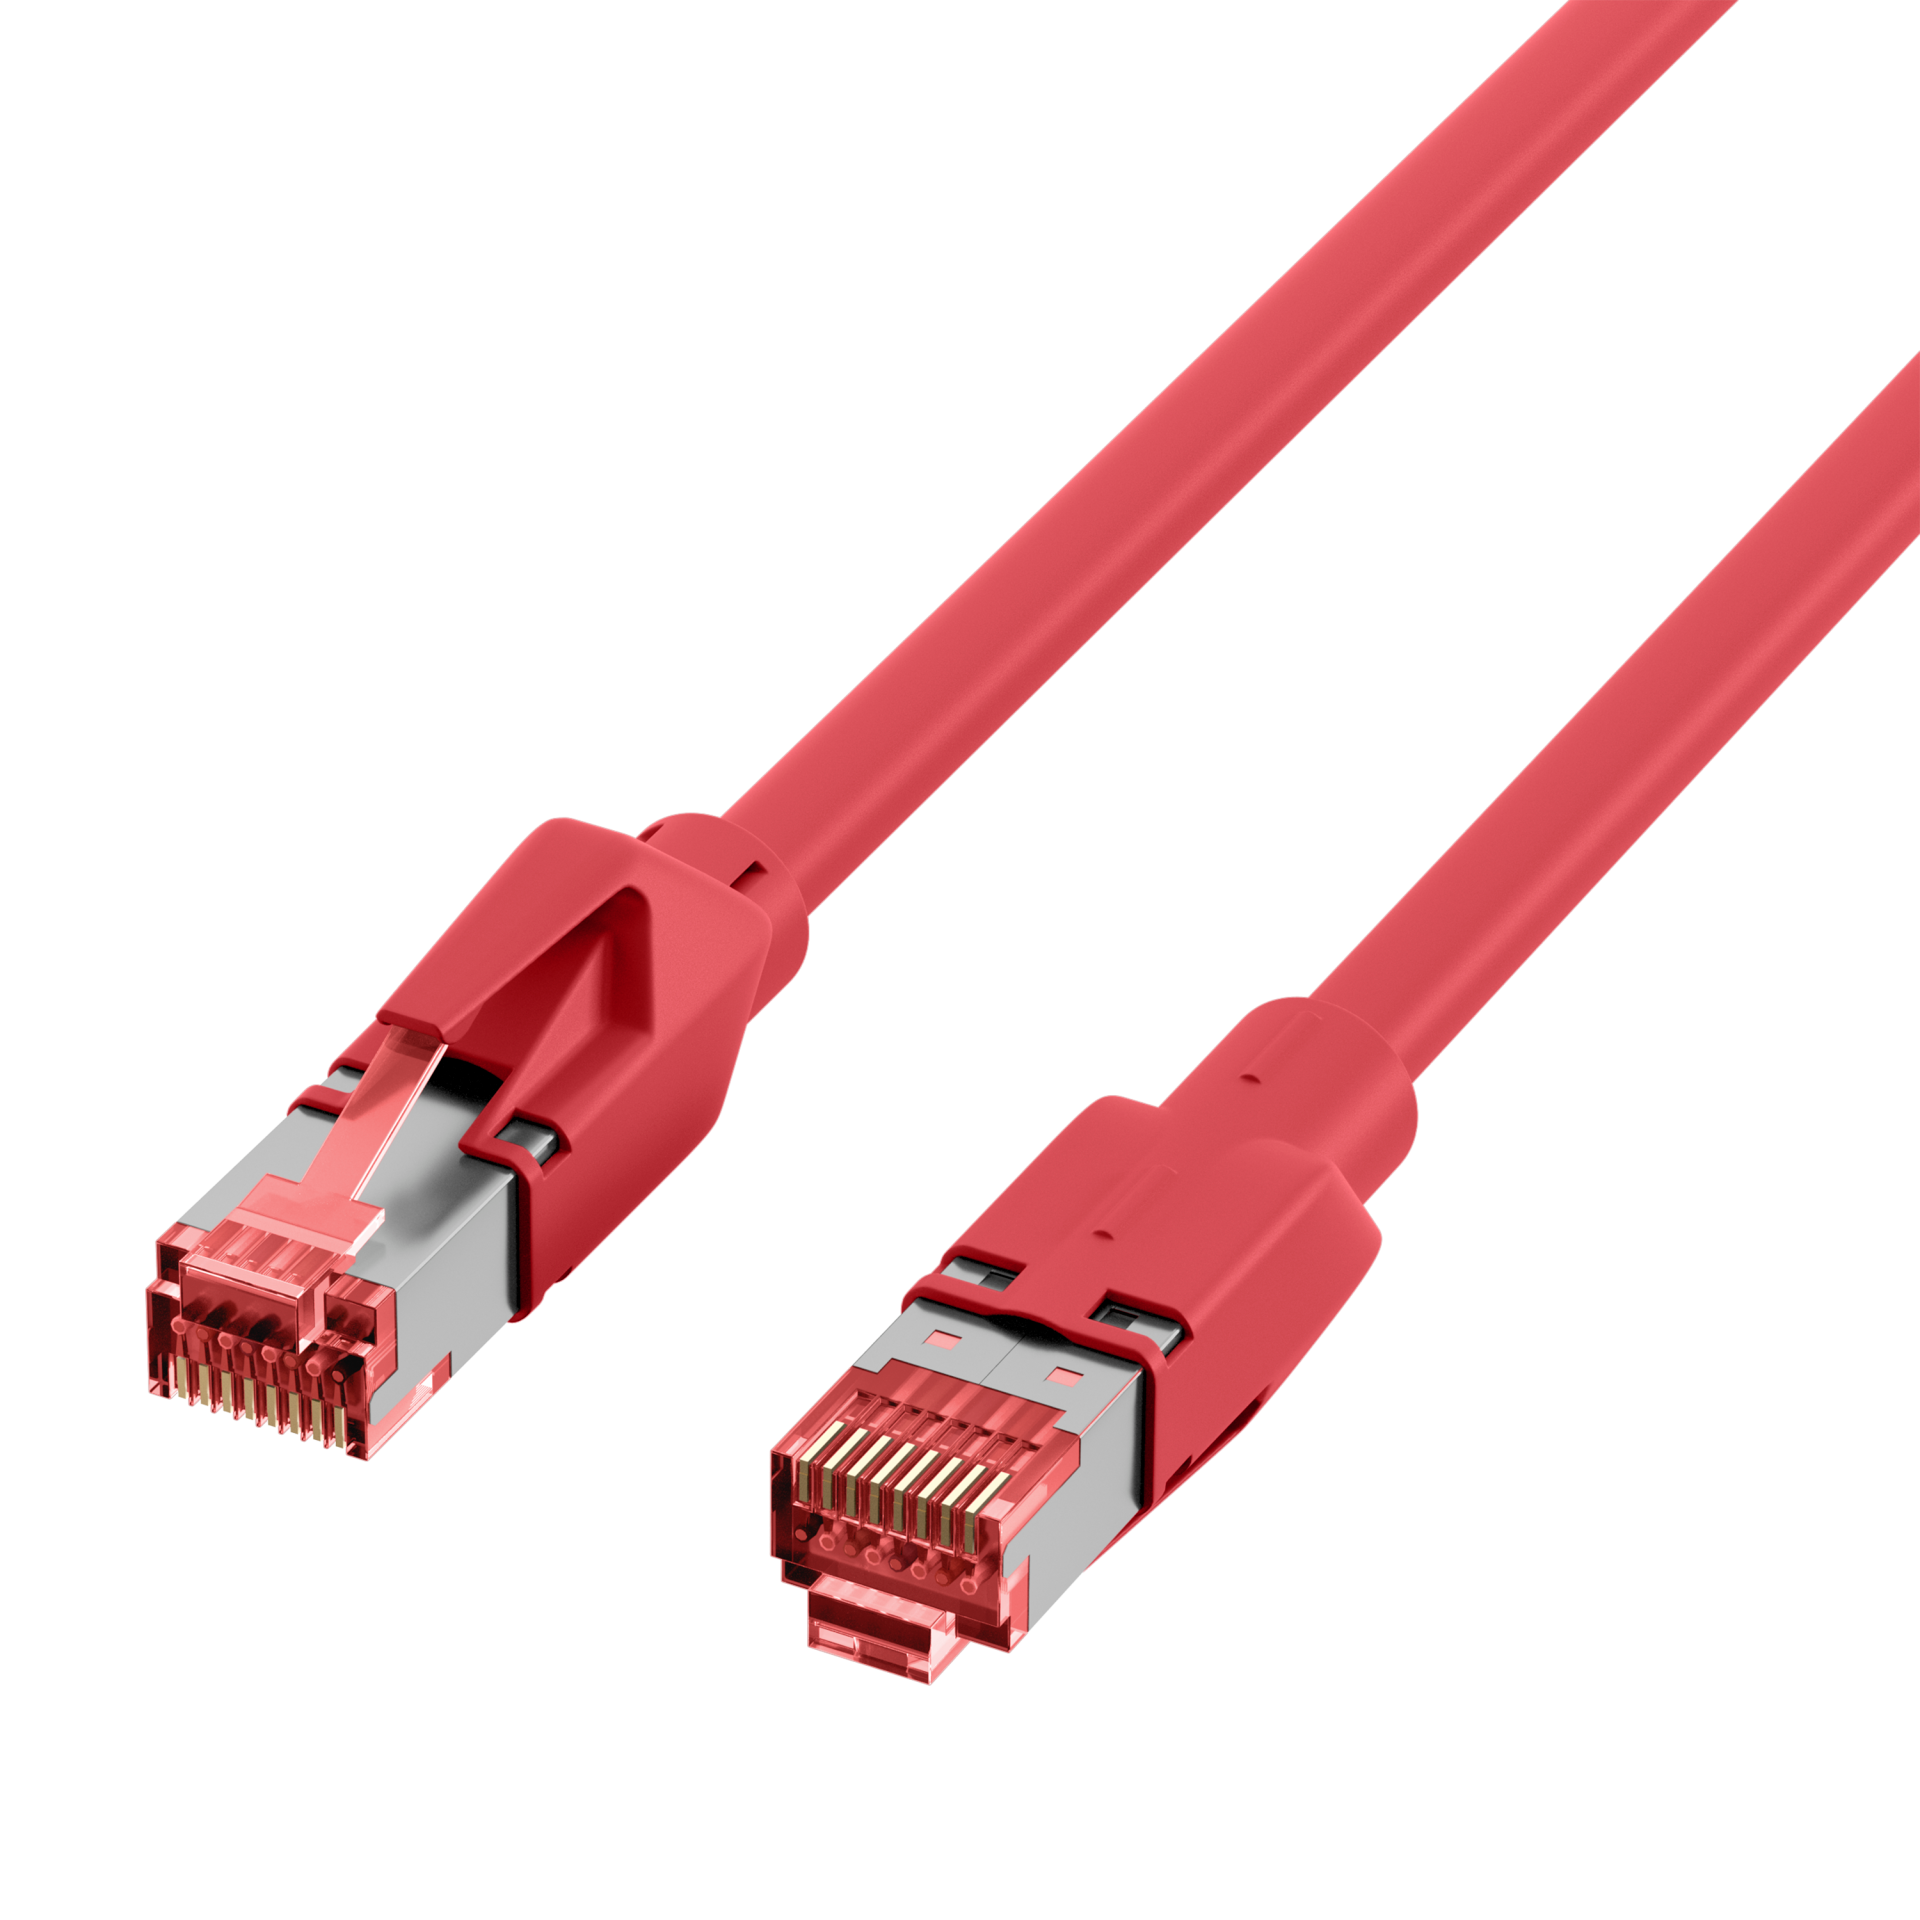 RJ45 Patch Cord Cat.6A S/FTP Dätwyler 7702 TM21 red 1,5m